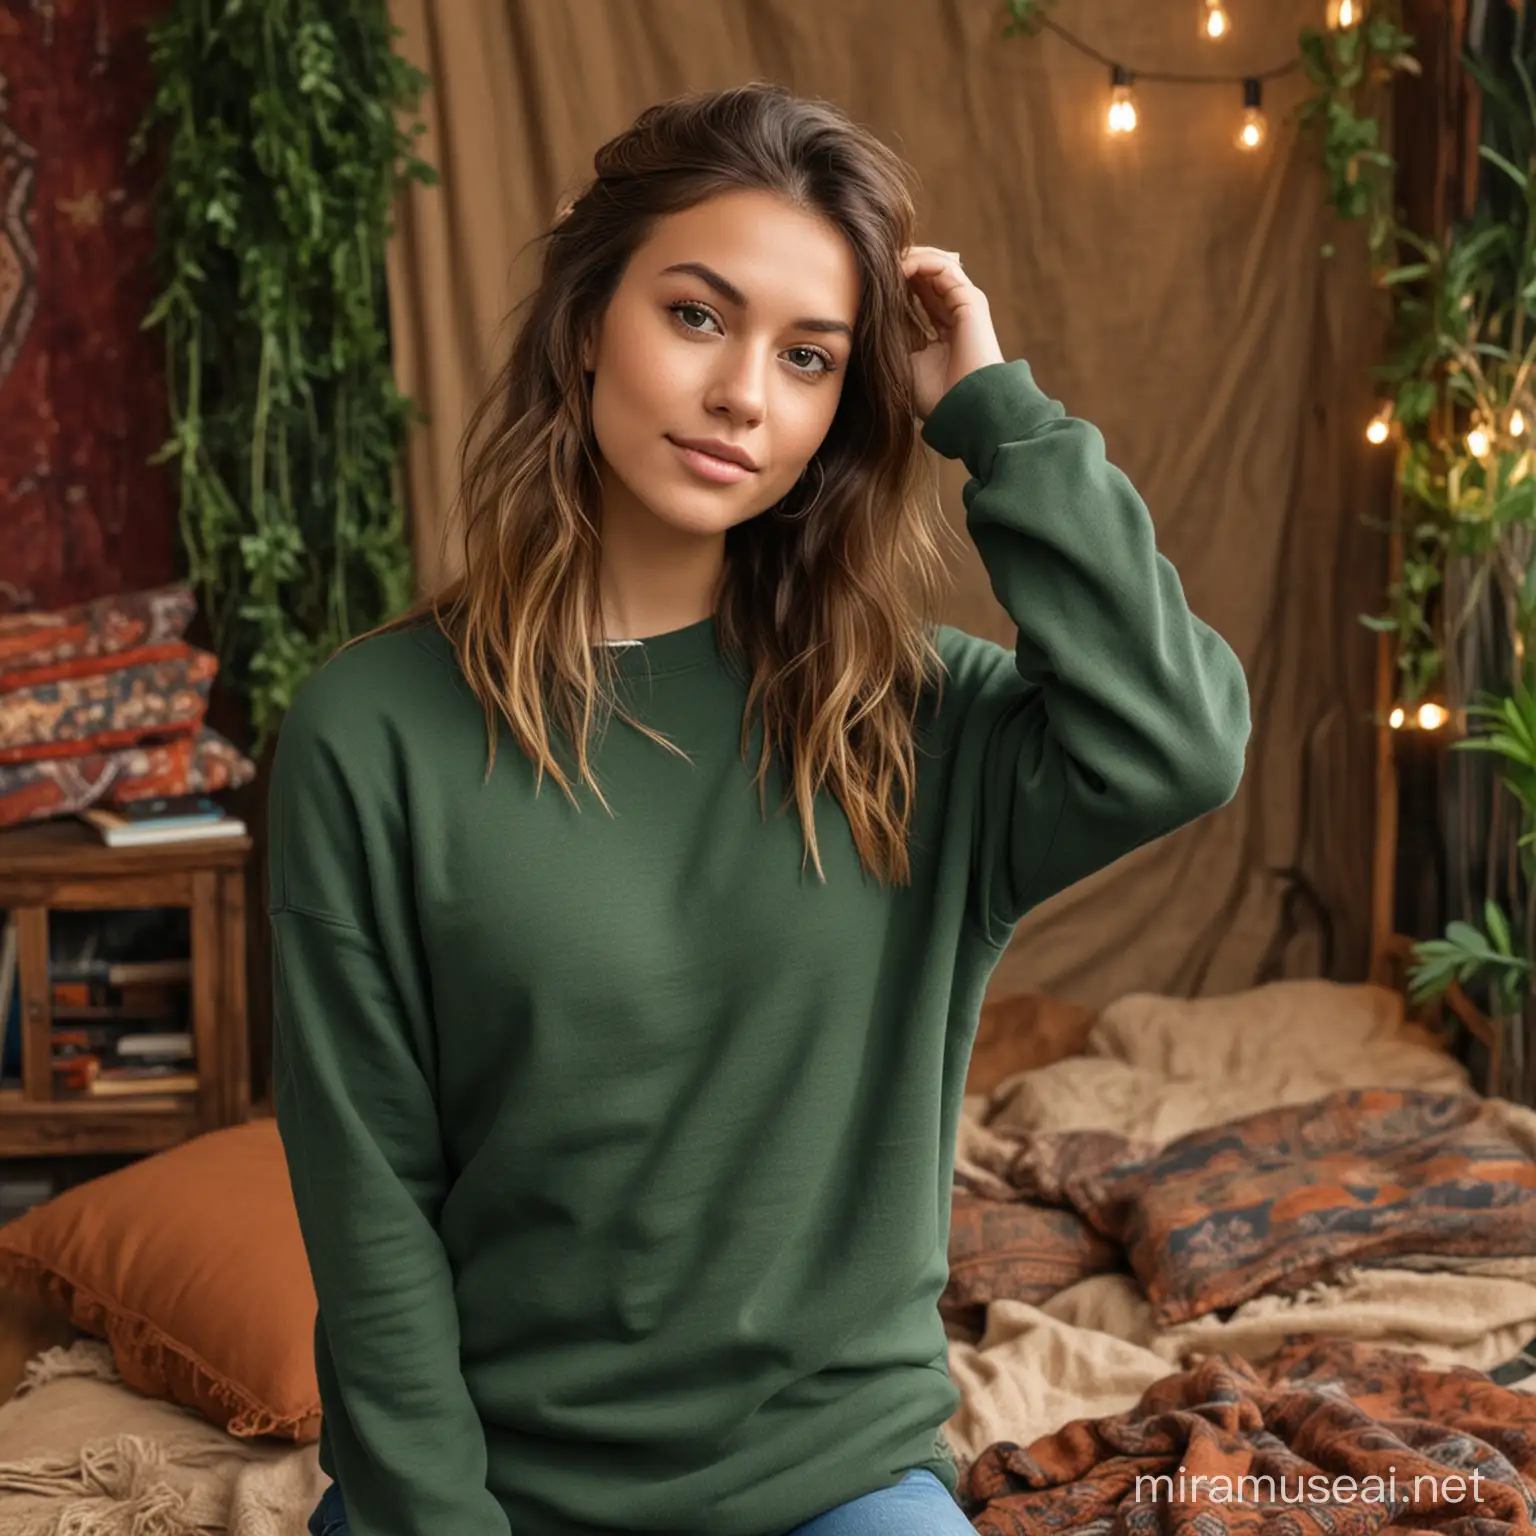 Young women, wearing a forest green crewneck sweatshirt, cozy Boho background, hair off to the side, 